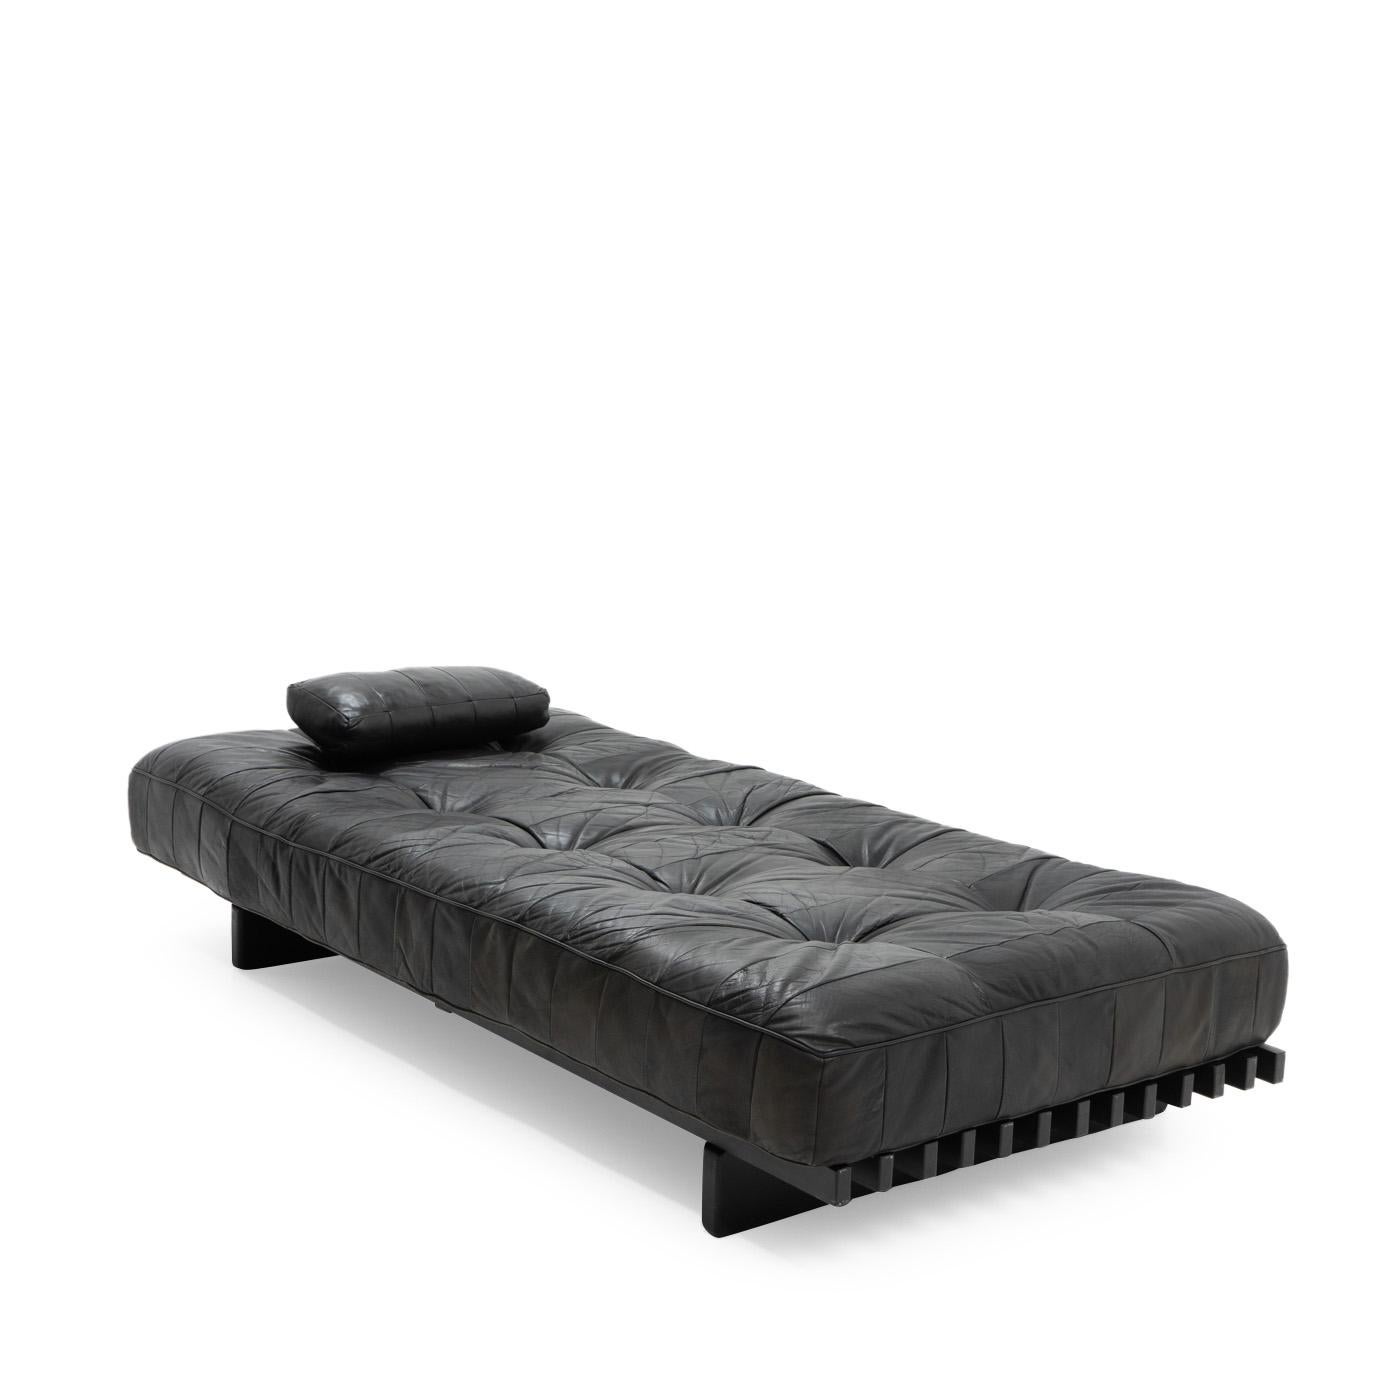 De Sede Daybed model DS-80 in beautifully patinated leather, featuring one pillow.

The leather is a patchwork design made from soft, black pigmented aniline leather, which typically gives a very lived look due to the open nature of the material.